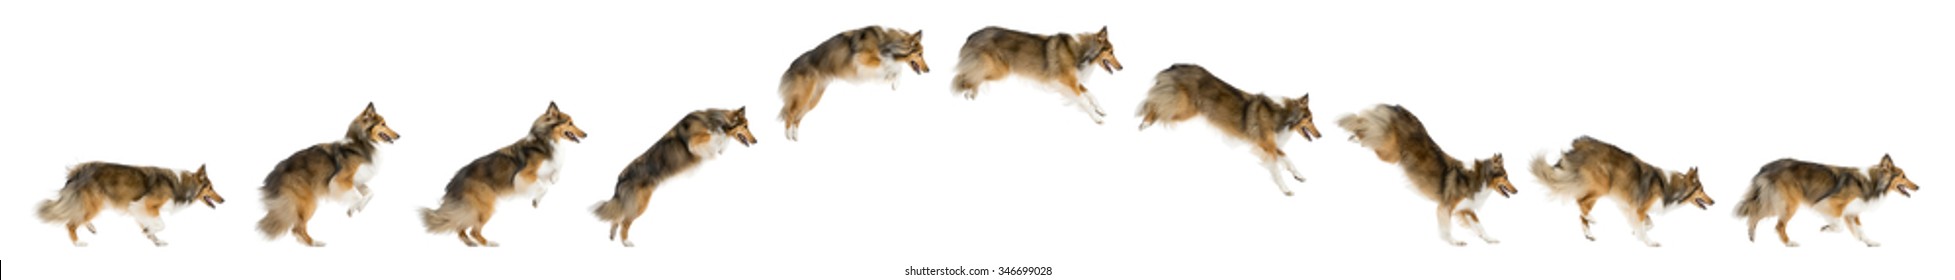 Composition of a Shetland Sheepdog jumping in front of a white background